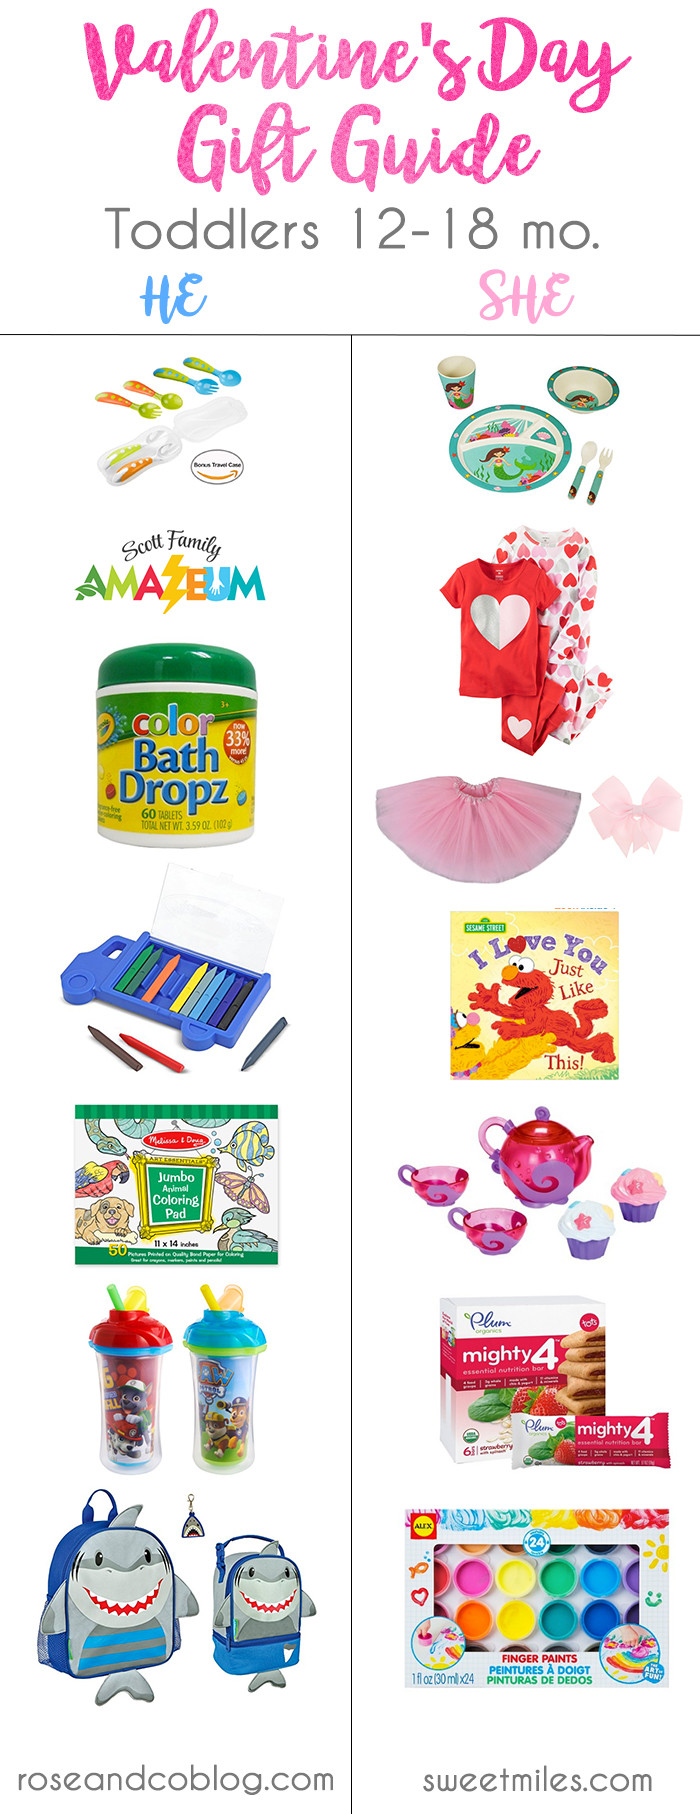 Toddler Valentines Day Gift Ideas
 Valentine s Day Gift Guide for Toddlers 12 18 Months